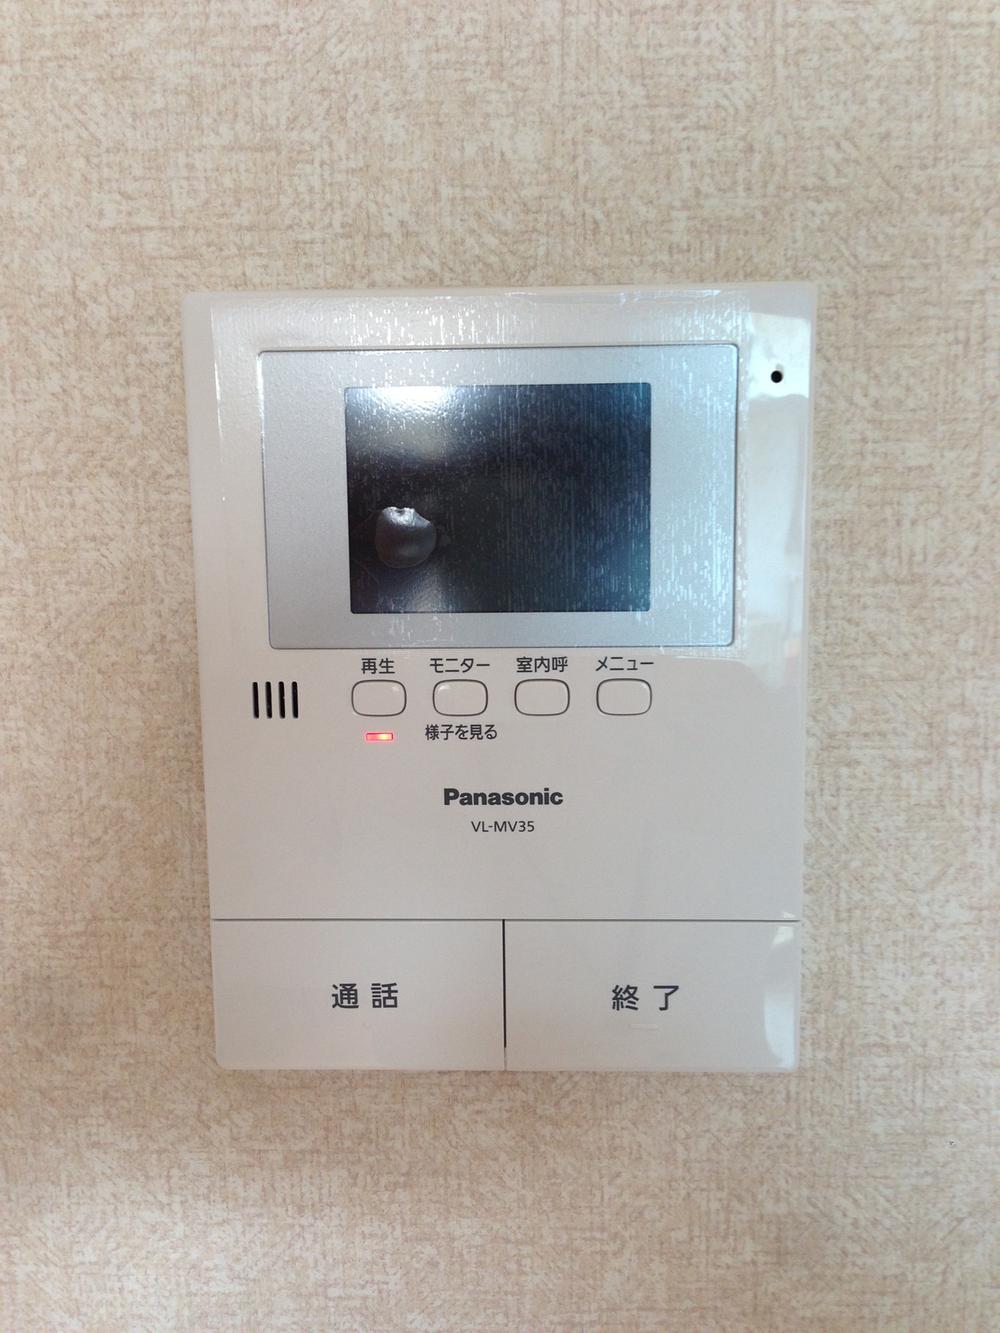 Security equipment. Color monitor with intercom (same specifications)